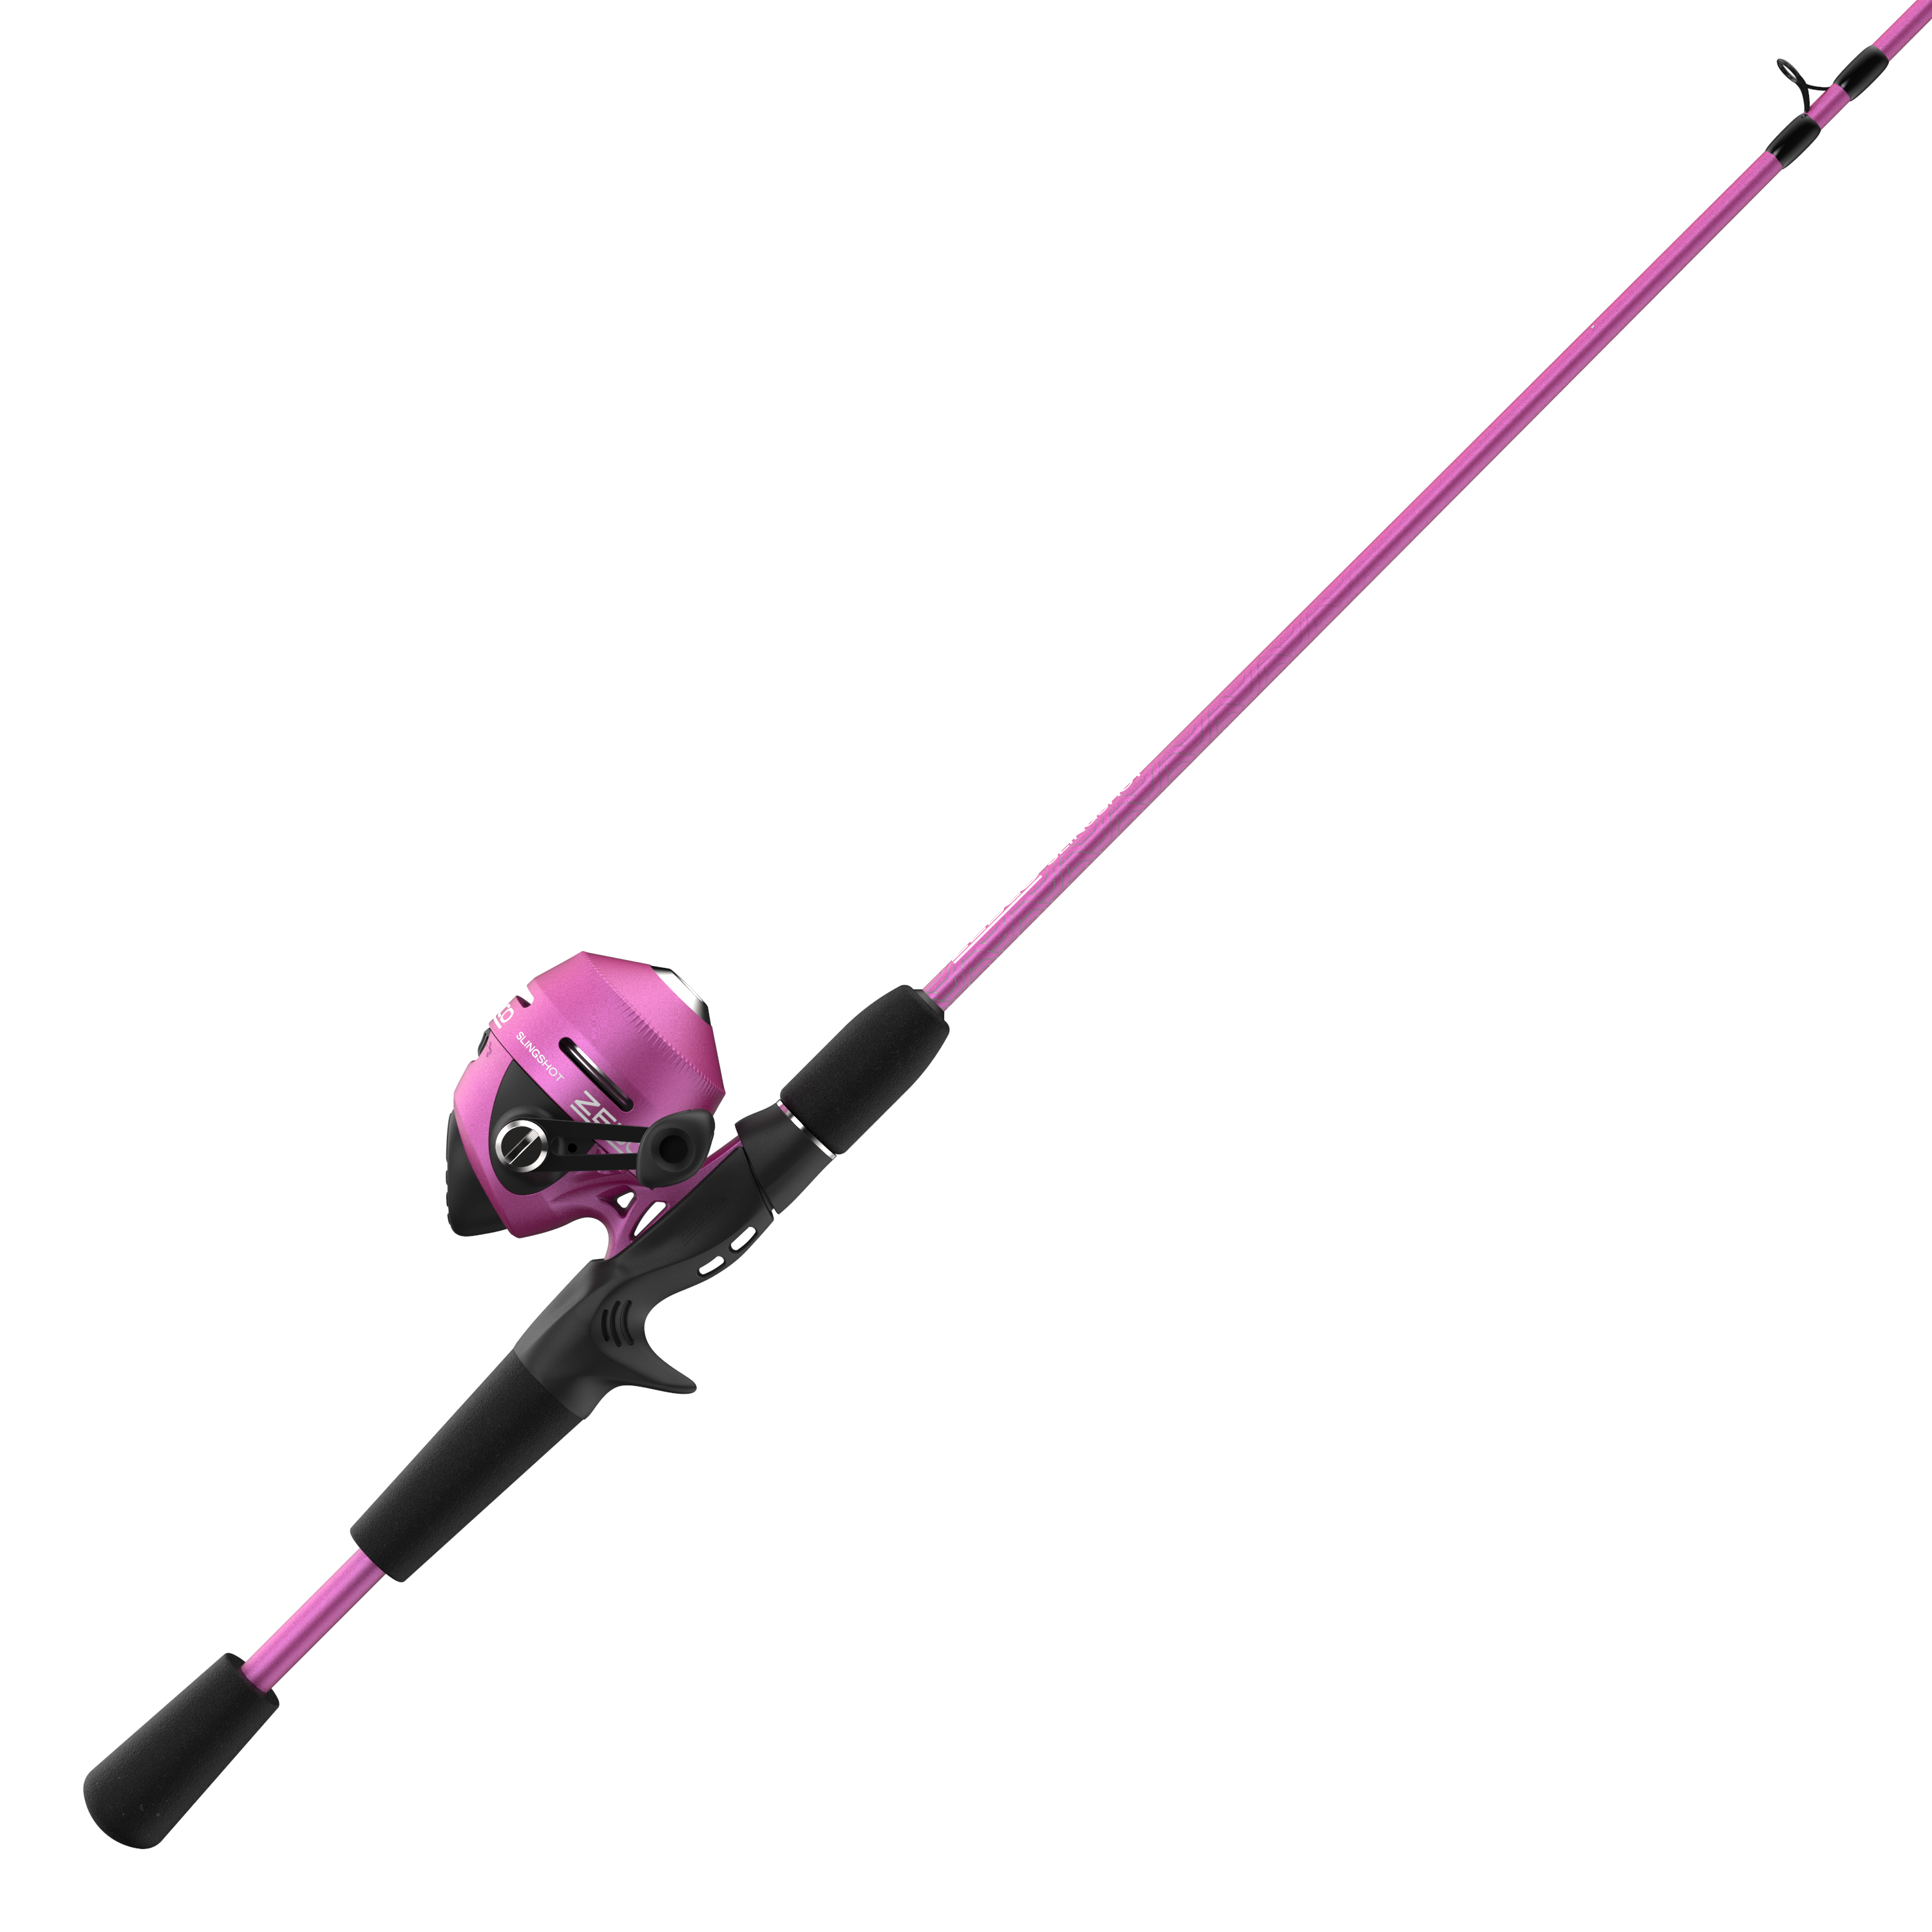 BL25 Spincast Bowfishing Reel Slingshot Bow Fishing, Stainless Steel,  Left/Right Reversible Handle, 3.3:1 Gear Ratio, Strong Line 5# 40 Yards